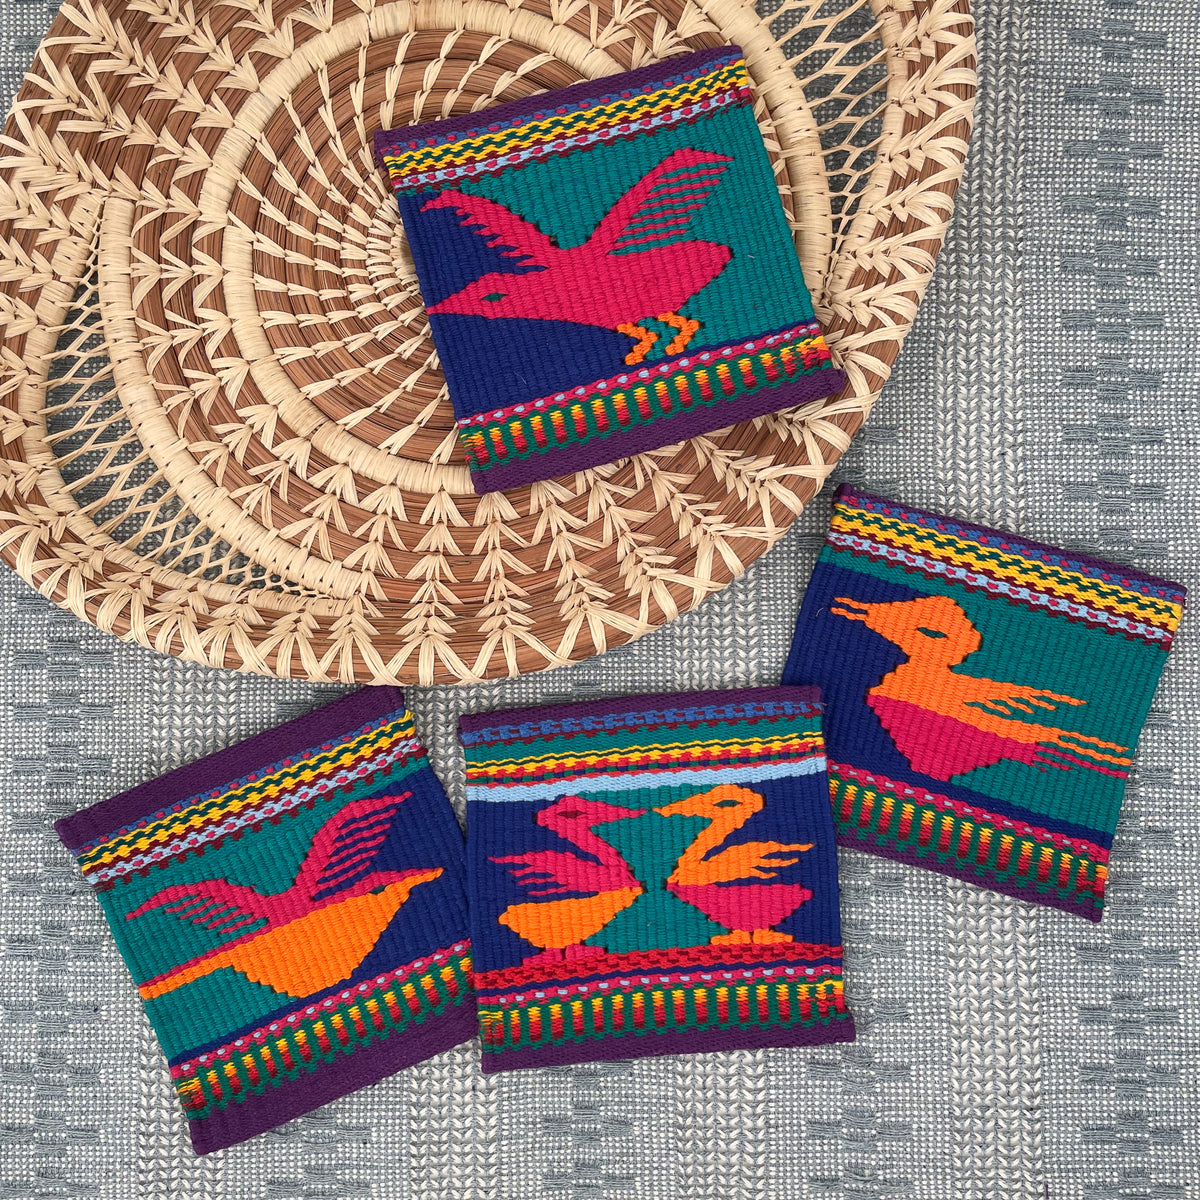 Set of four colorful handwoven pajarito coasters displayed over Calado table runner and Angela pine needle basket tray with mesh detail on handles.